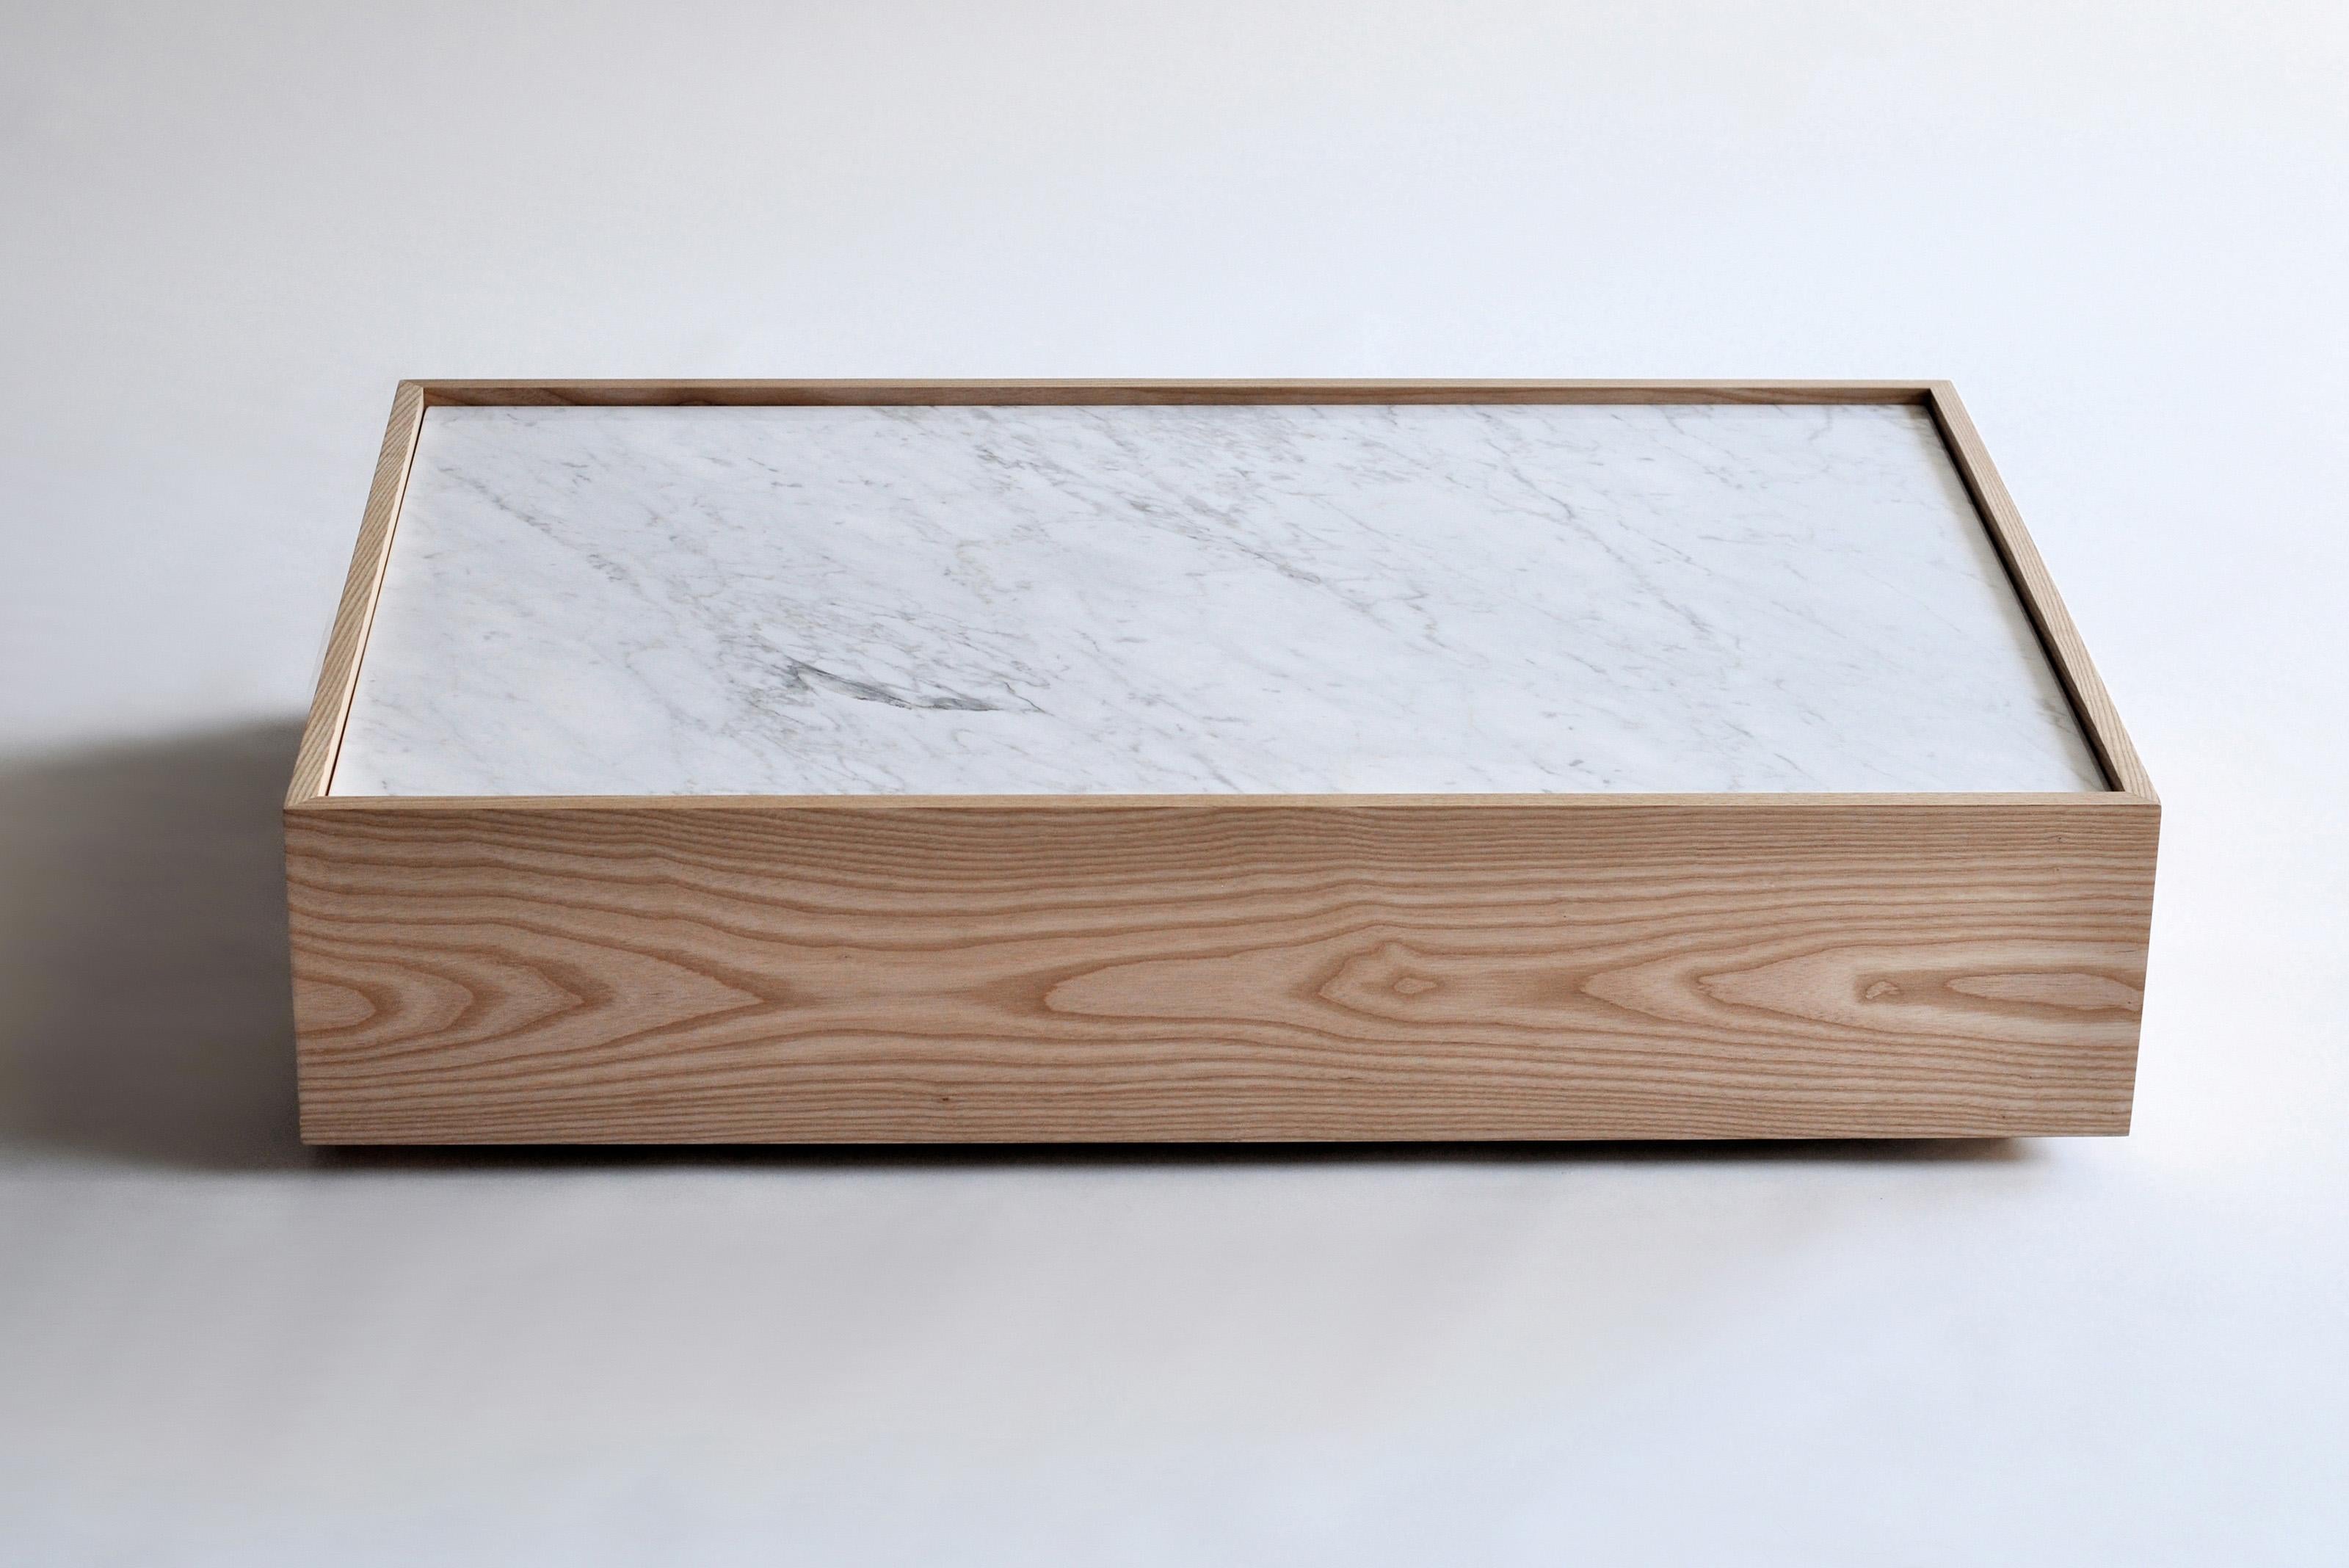 Nemesis Version A Coffee Table by Phase Design
Dimensions: D 76.2 x W 114.3 x H 25.4 cm. 
Materials: Carrara marble and white ash.

Solid walnut, white ash, white oak, or ebonized oak, available in all wood construction with or without white Carrara